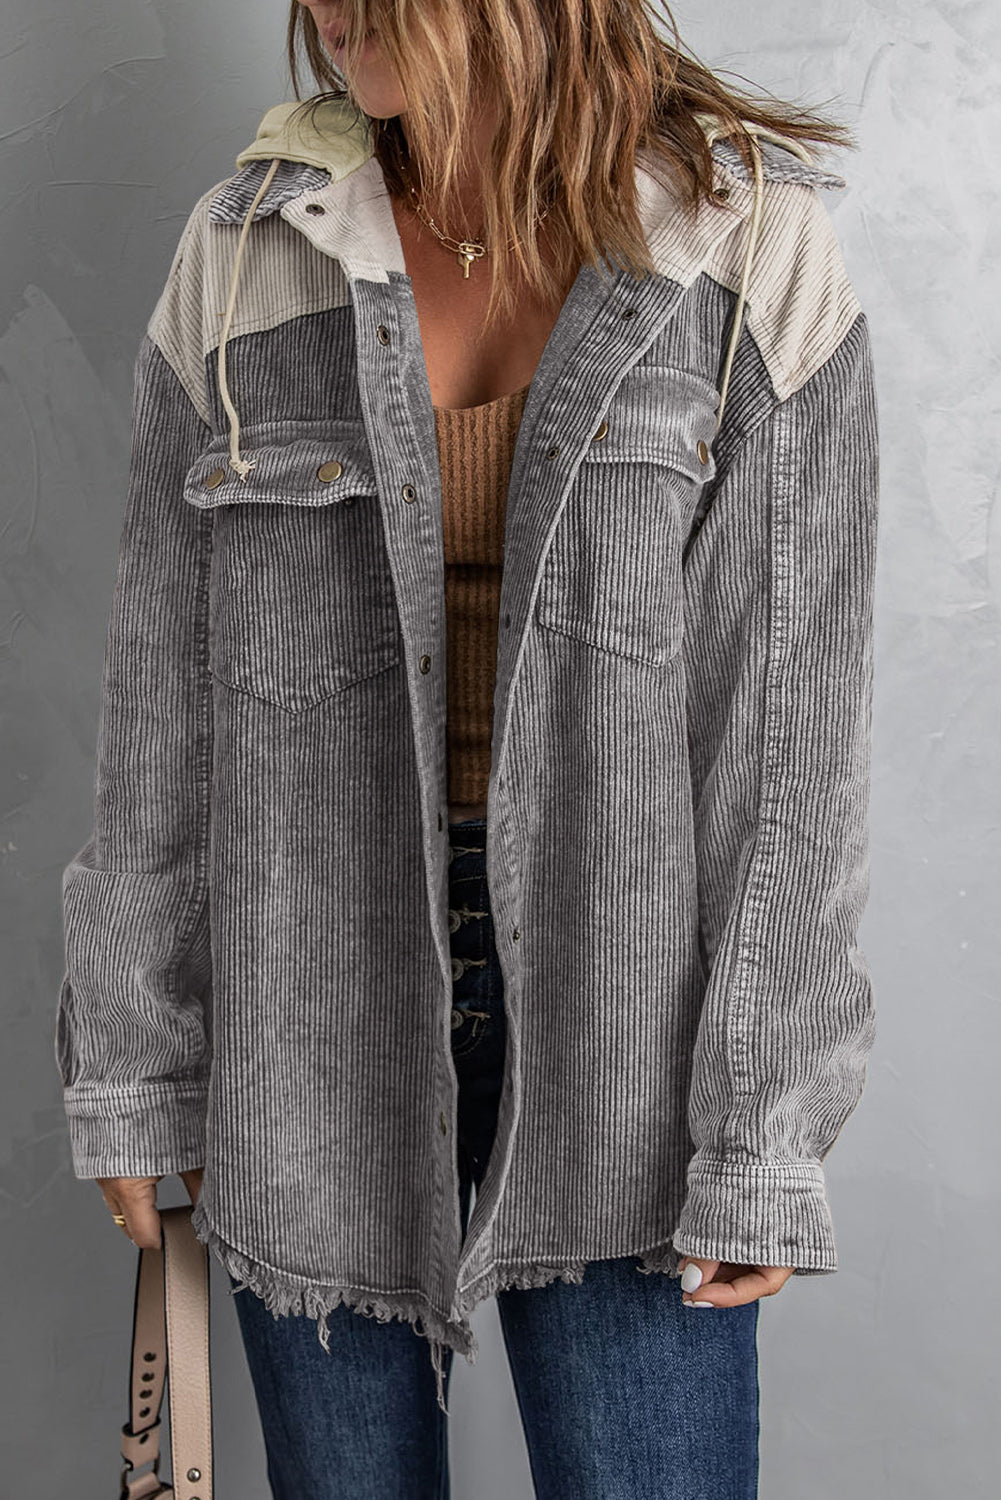 Gray Color Block Button Down Hooded Corduroy Jacket